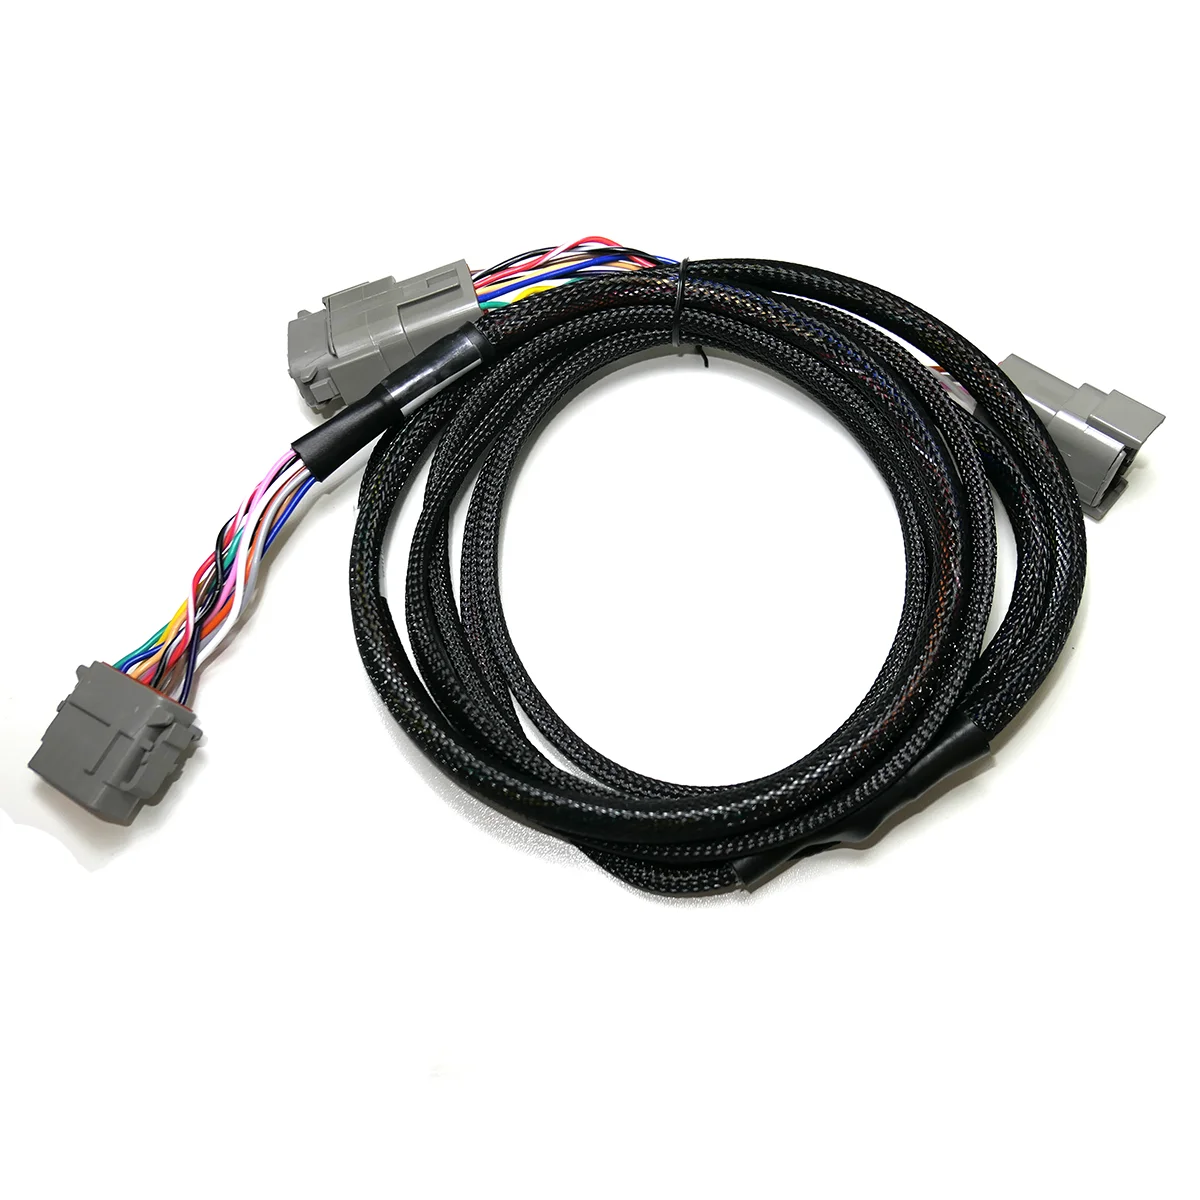 

New Tianbao 75741 Data Cable For Agriculture CFX-750 FM-750 Display